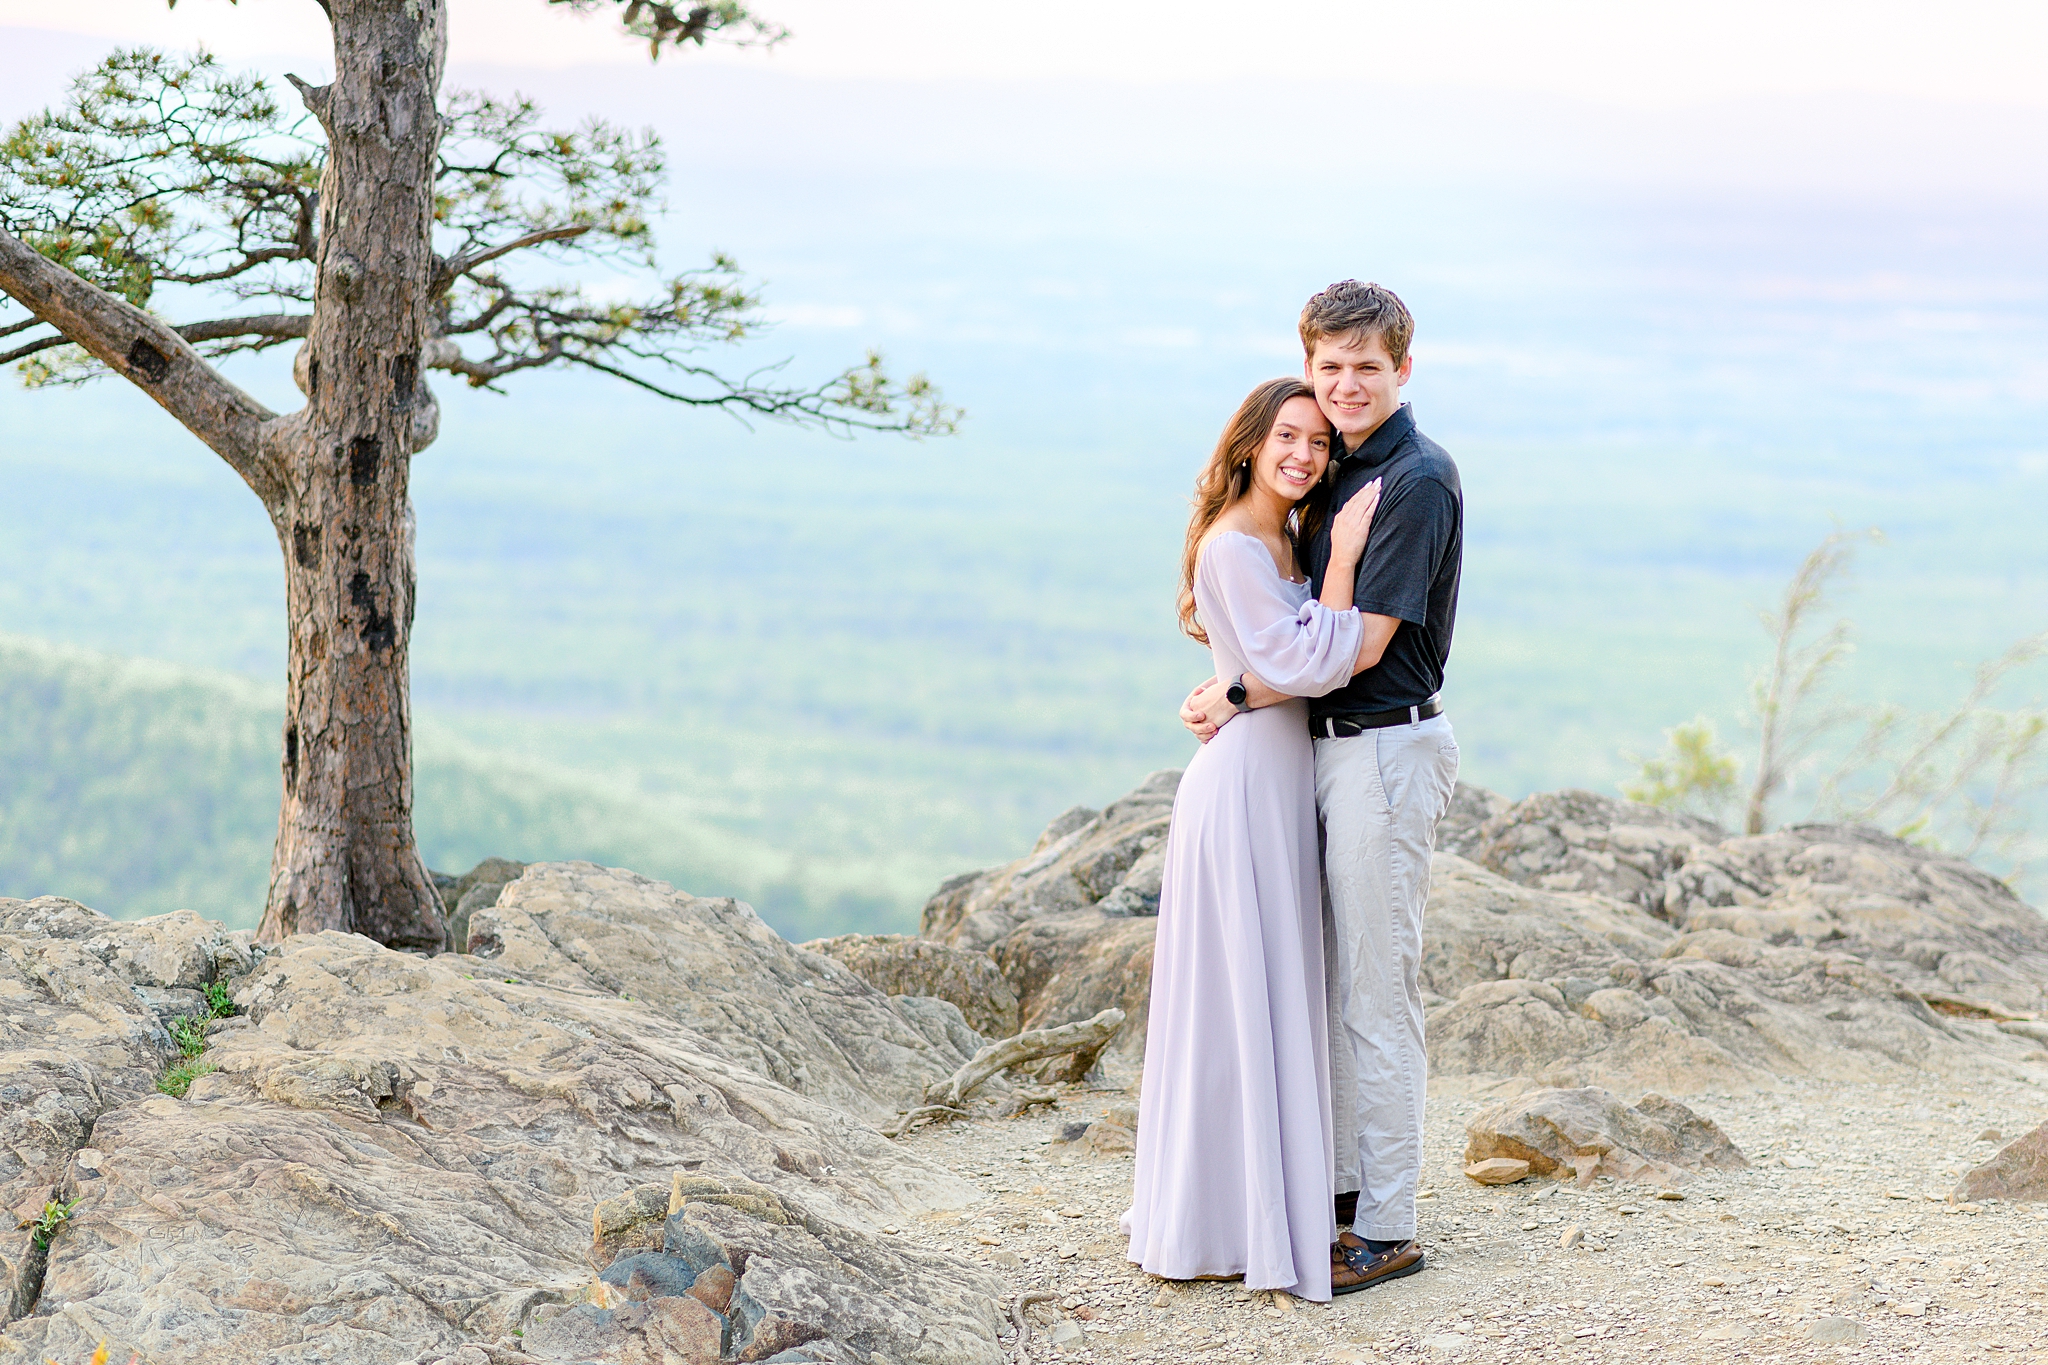 A stunning engagement photo taken at Ravens Roost 